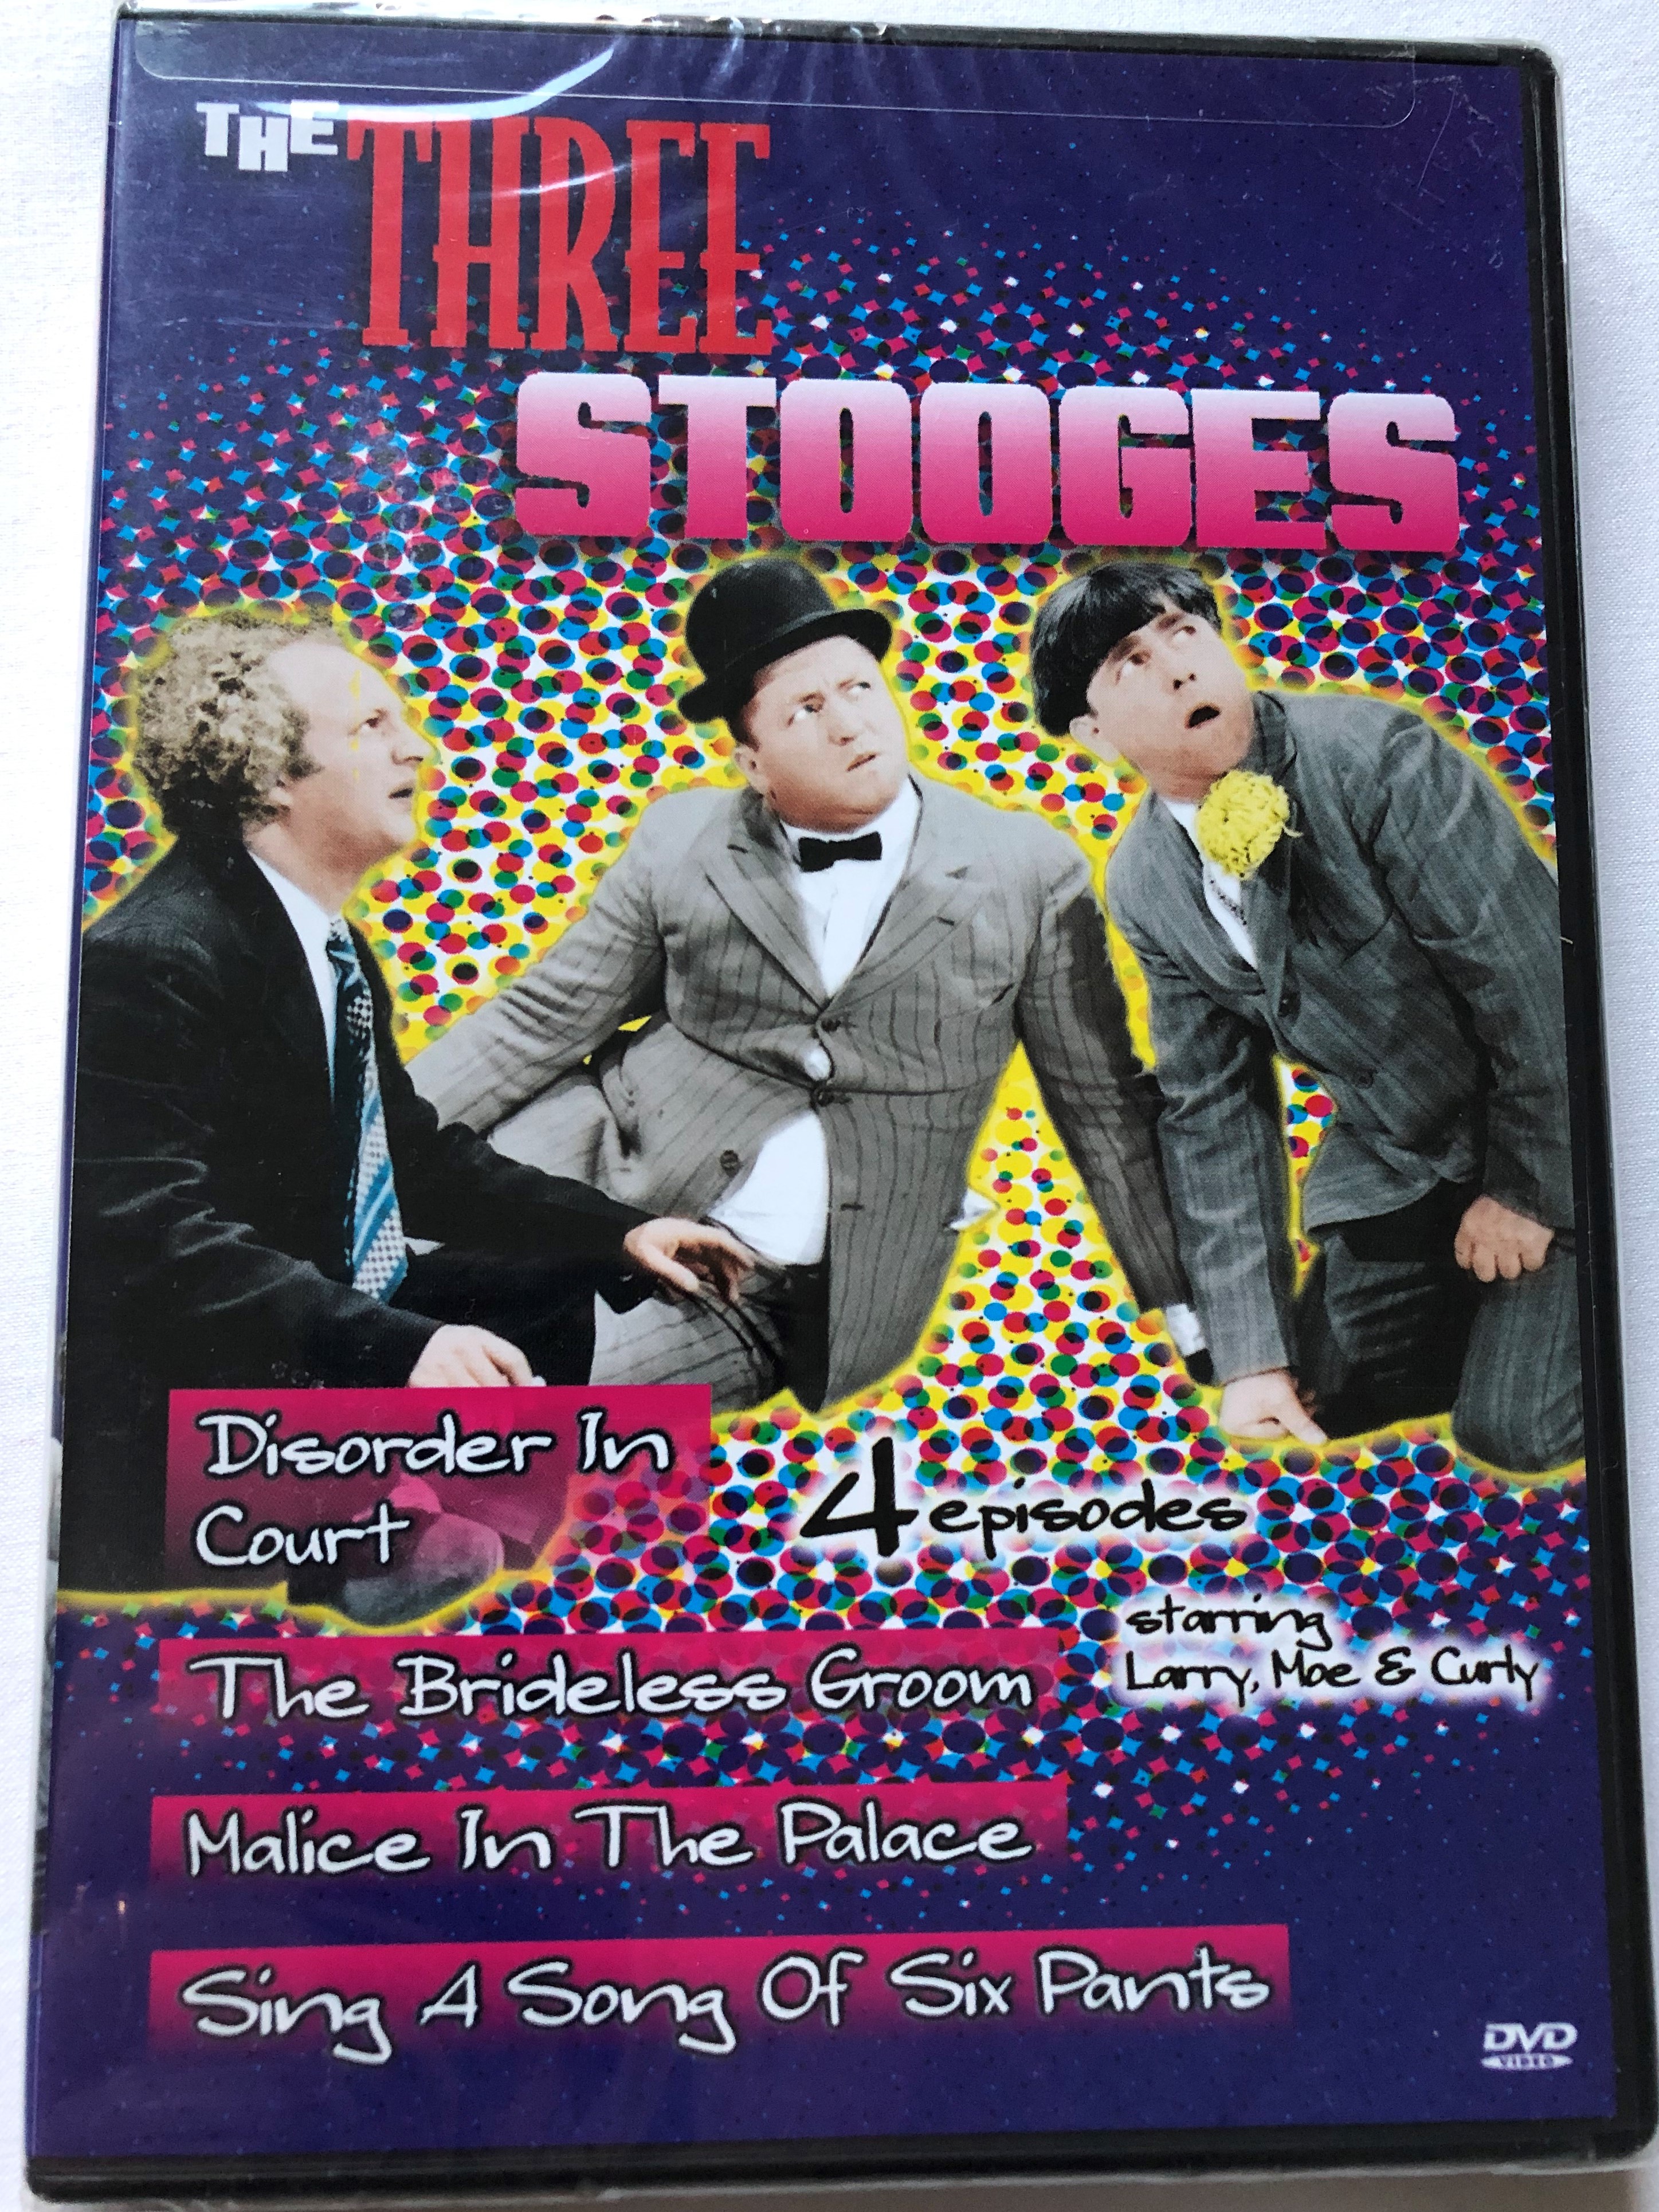 the-three-stooges-4-episodes-dvd-2003-disorder-in-court-the-brideless-groom-malice-in-the-palace-singa-a-song-of-six-pants-starring-larry-fine-moe-howard-curly-howard-shemp-howard-1-.jpg